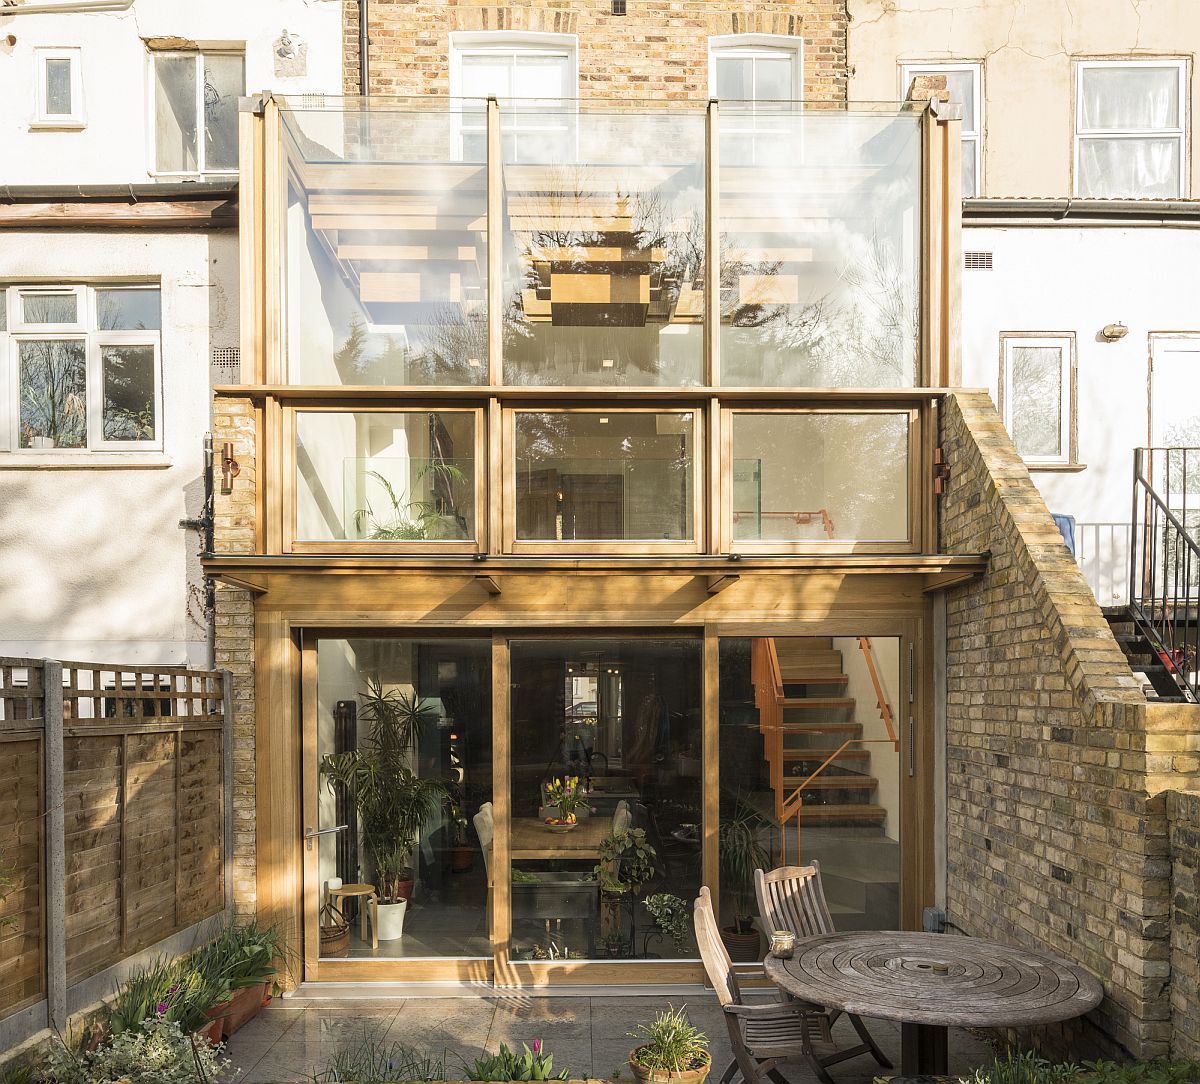 Double-height-glazed-extension-in-oak-and-glass-transforms19th-century-home-in-UK-57123